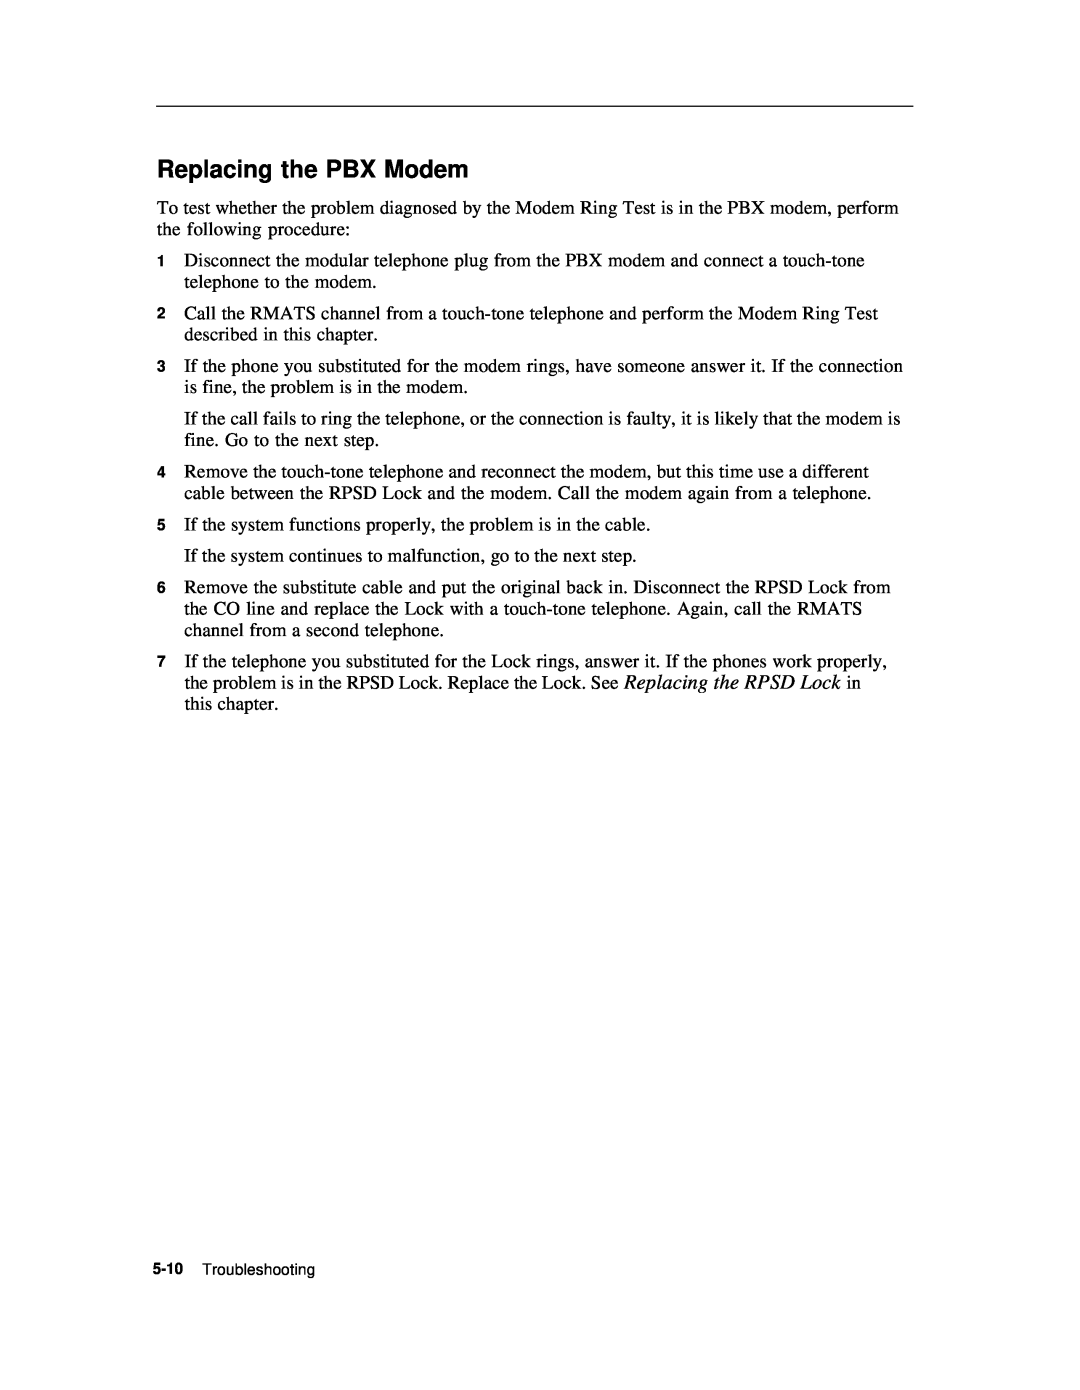 AT&T Remote Port Security Device user manual Replacing the PBX Modem, Troubleshooting 